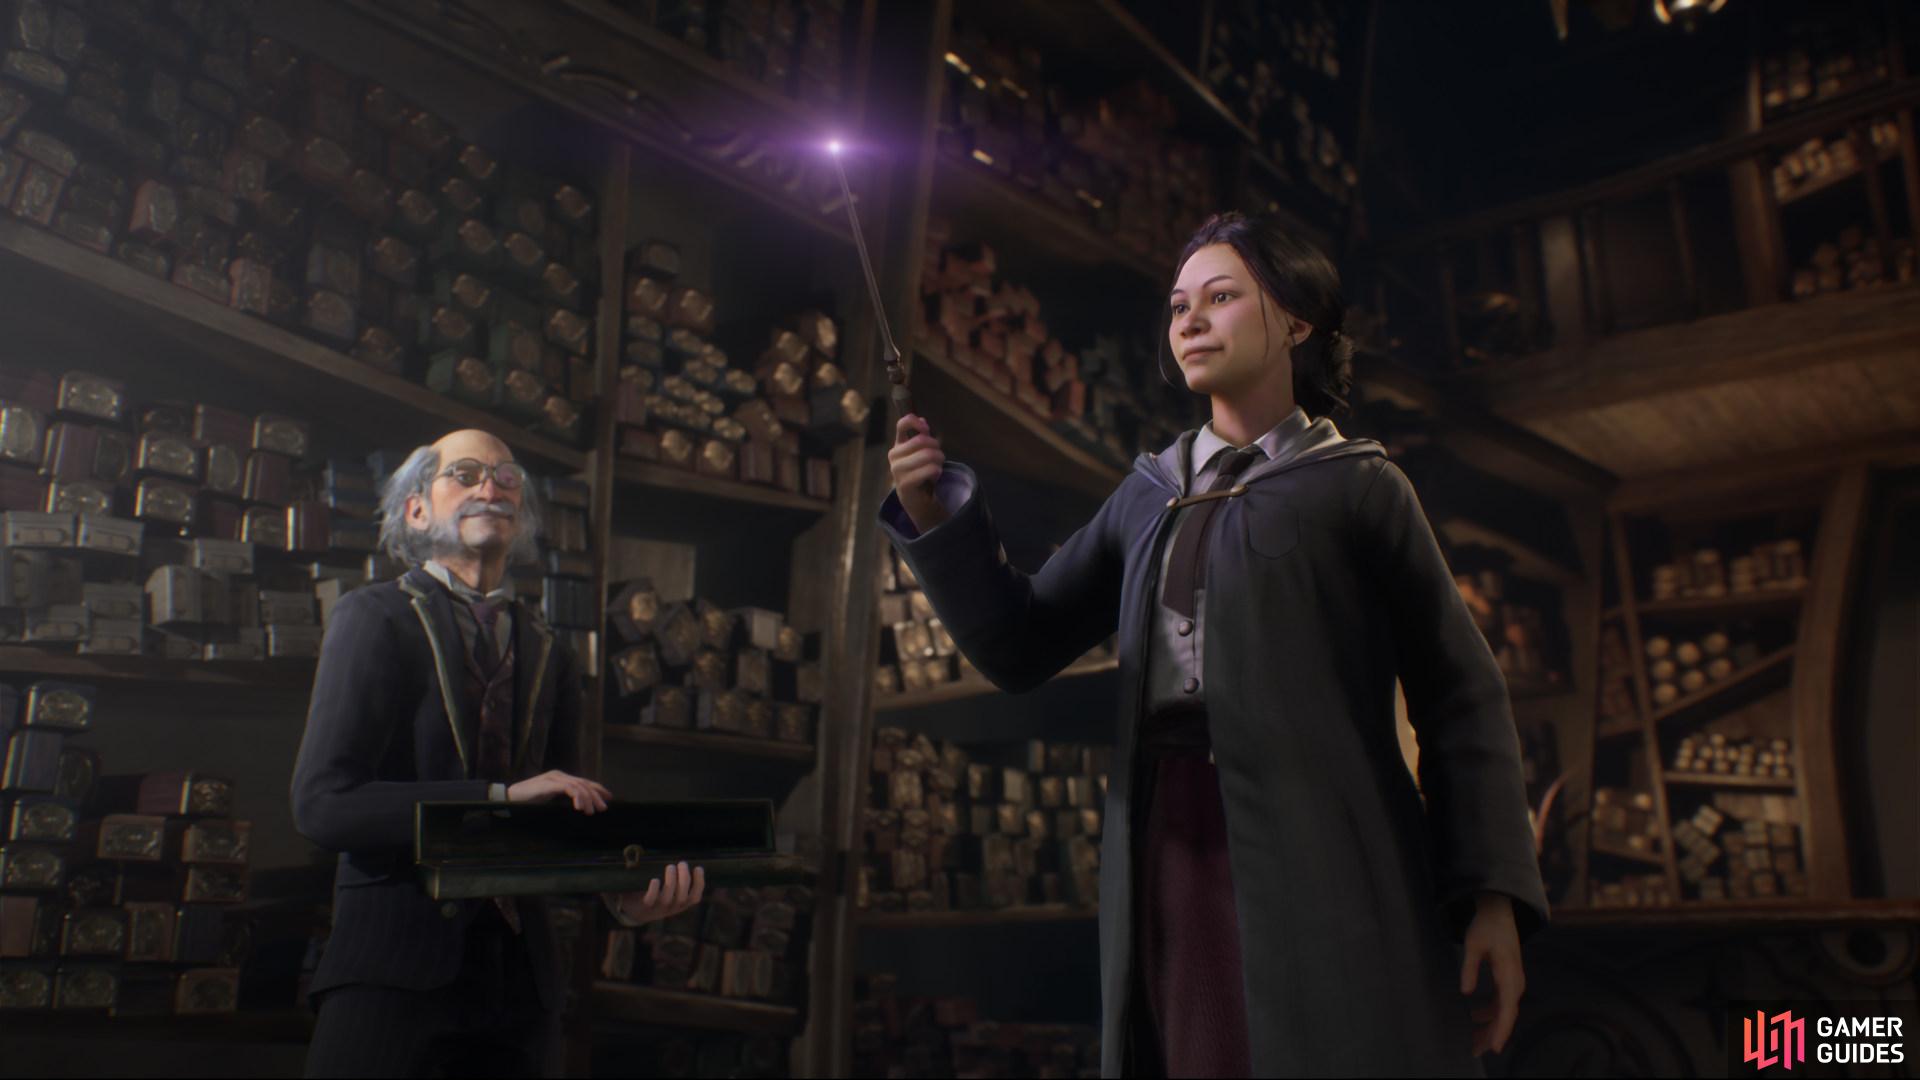 Here is a look at the in-game Hogwarts Legacy Wand Customization feature. Image via Warner Brothers.